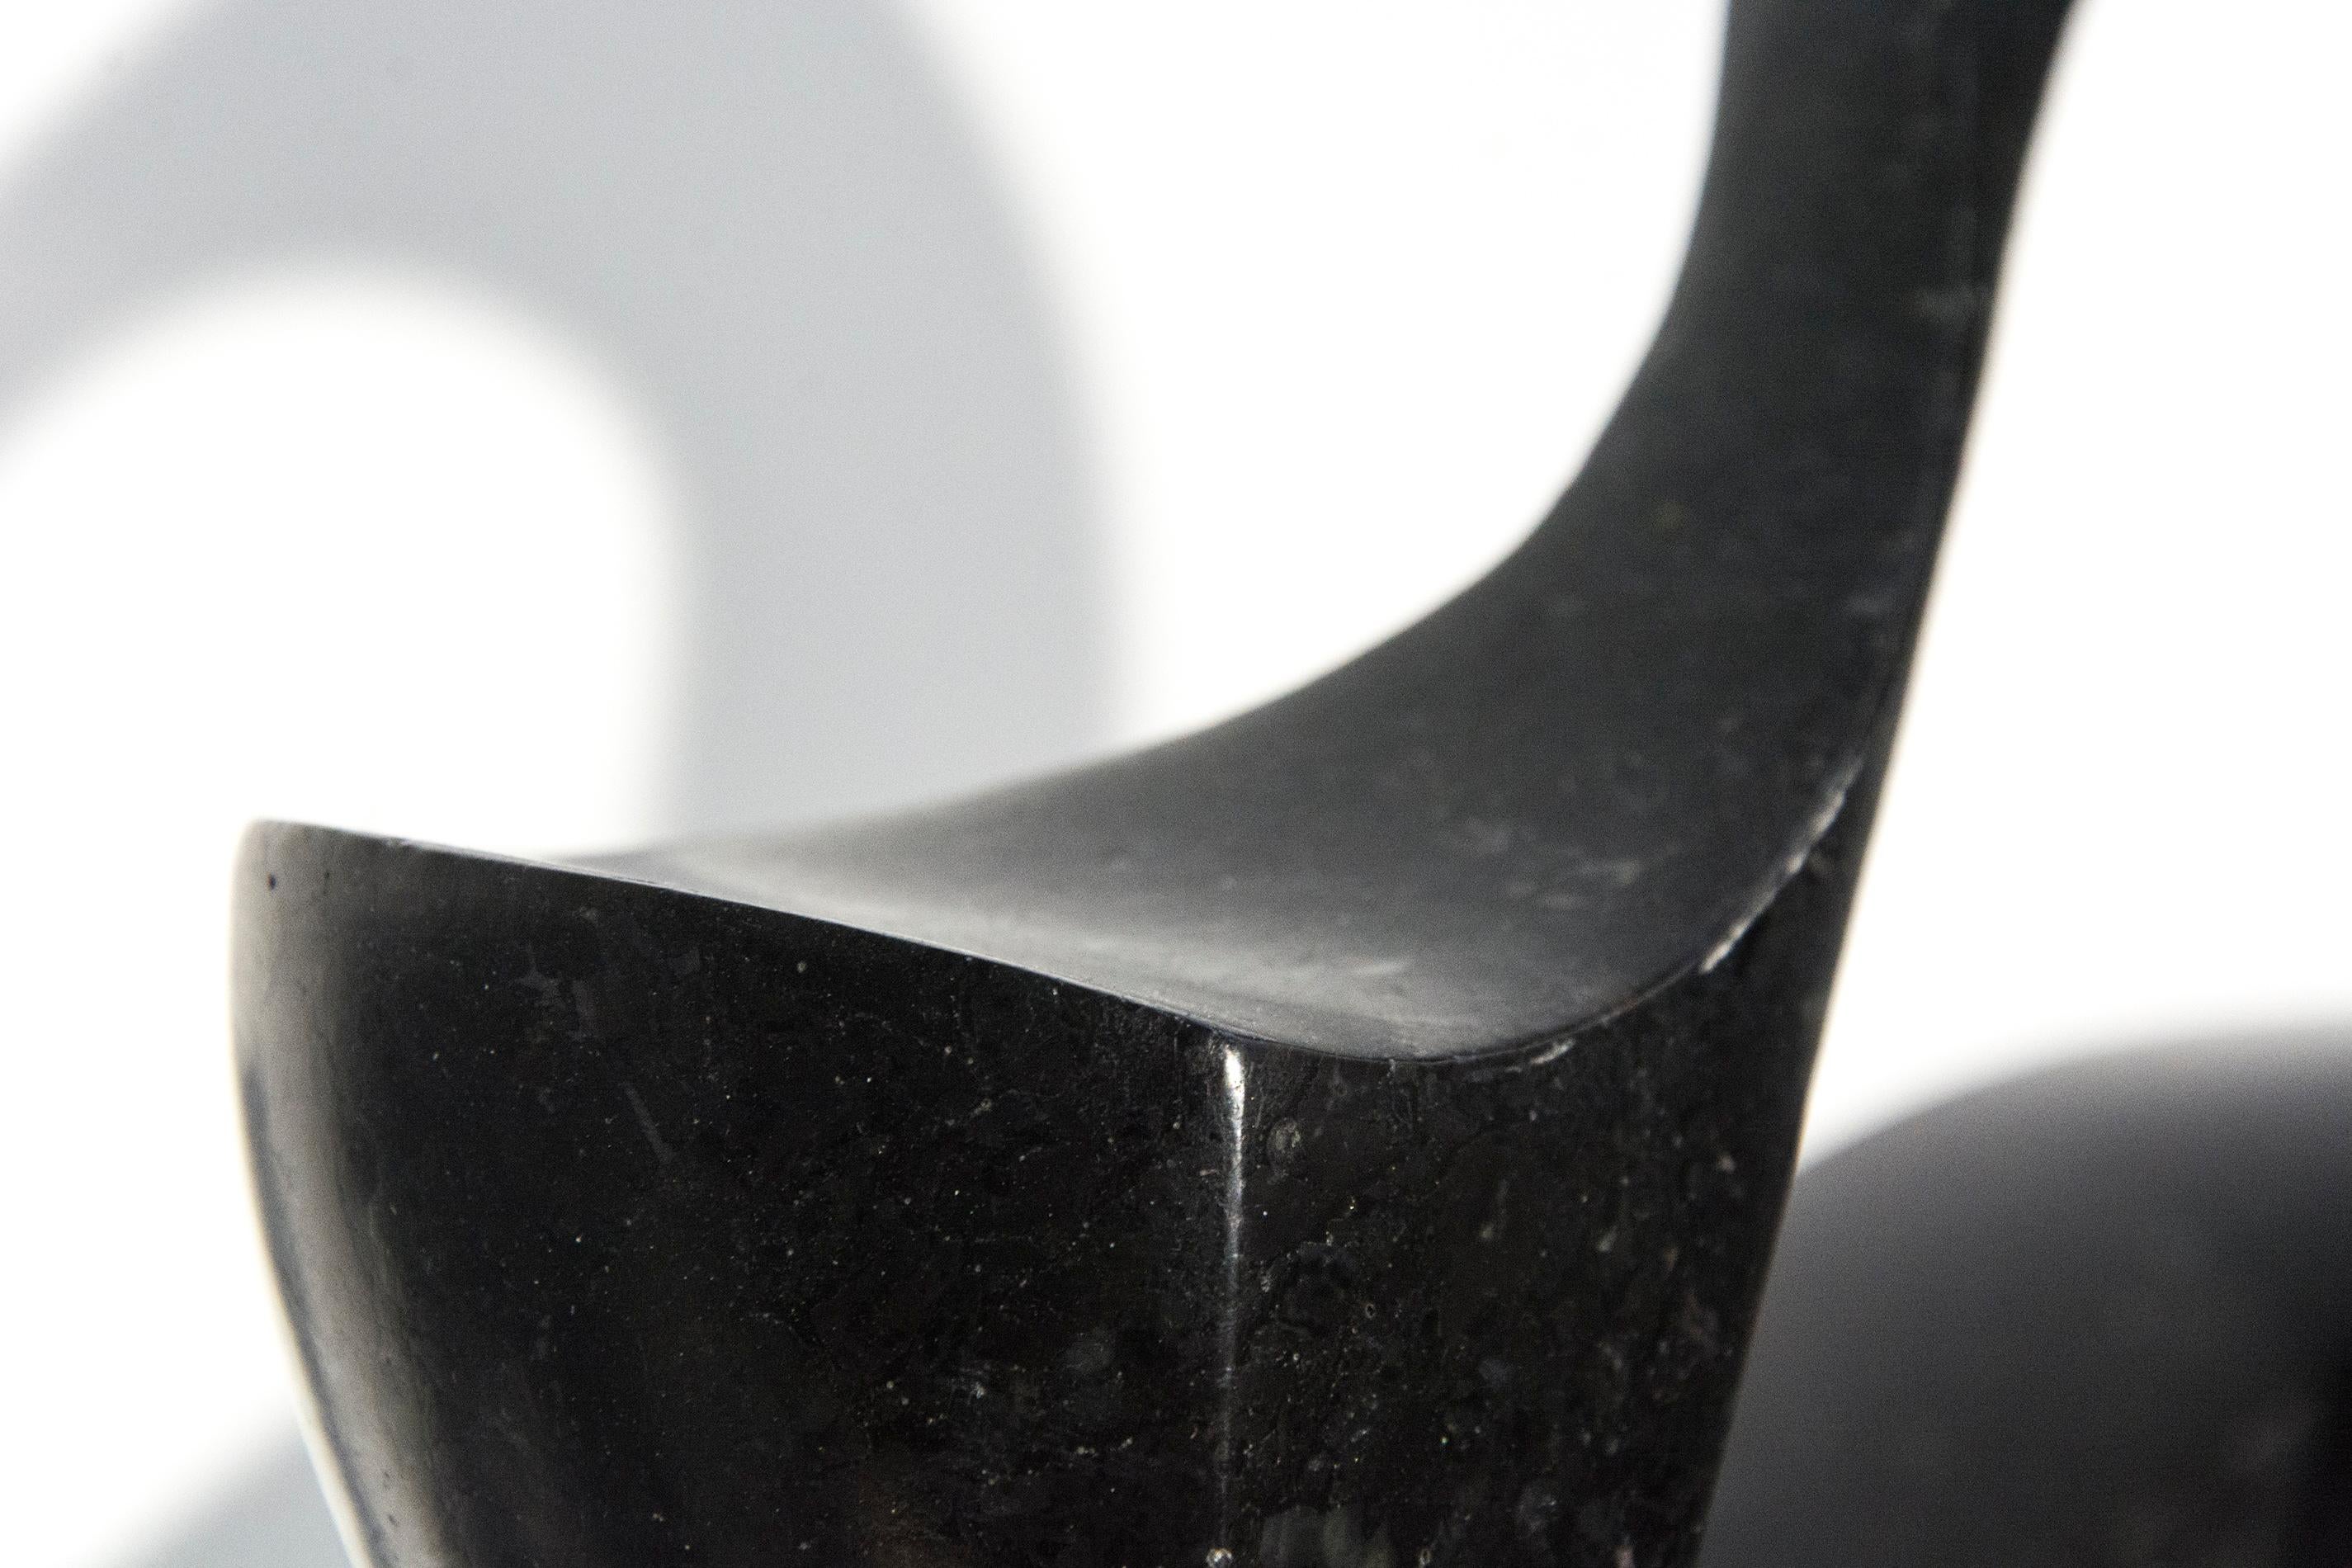 Embrace 1/50 - small, smooth, polished, abstract, black granite sculpture - Gray Abstract Sculpture by Jeremy Guy